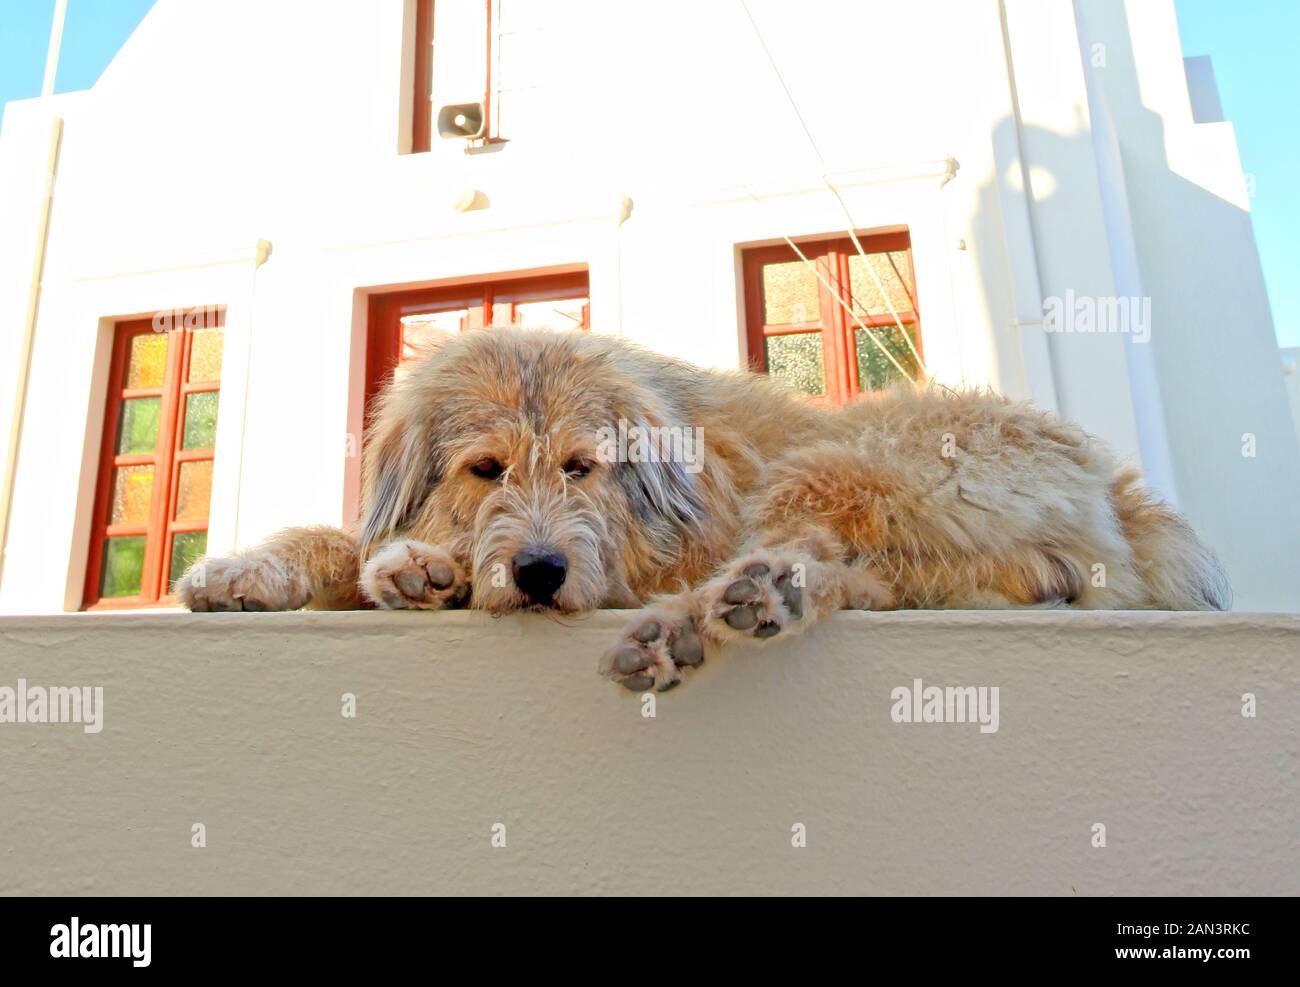 A scruffy dog lying on a wall in front of a small church in the town of Oia in Santorini, Greece. Stock Photo